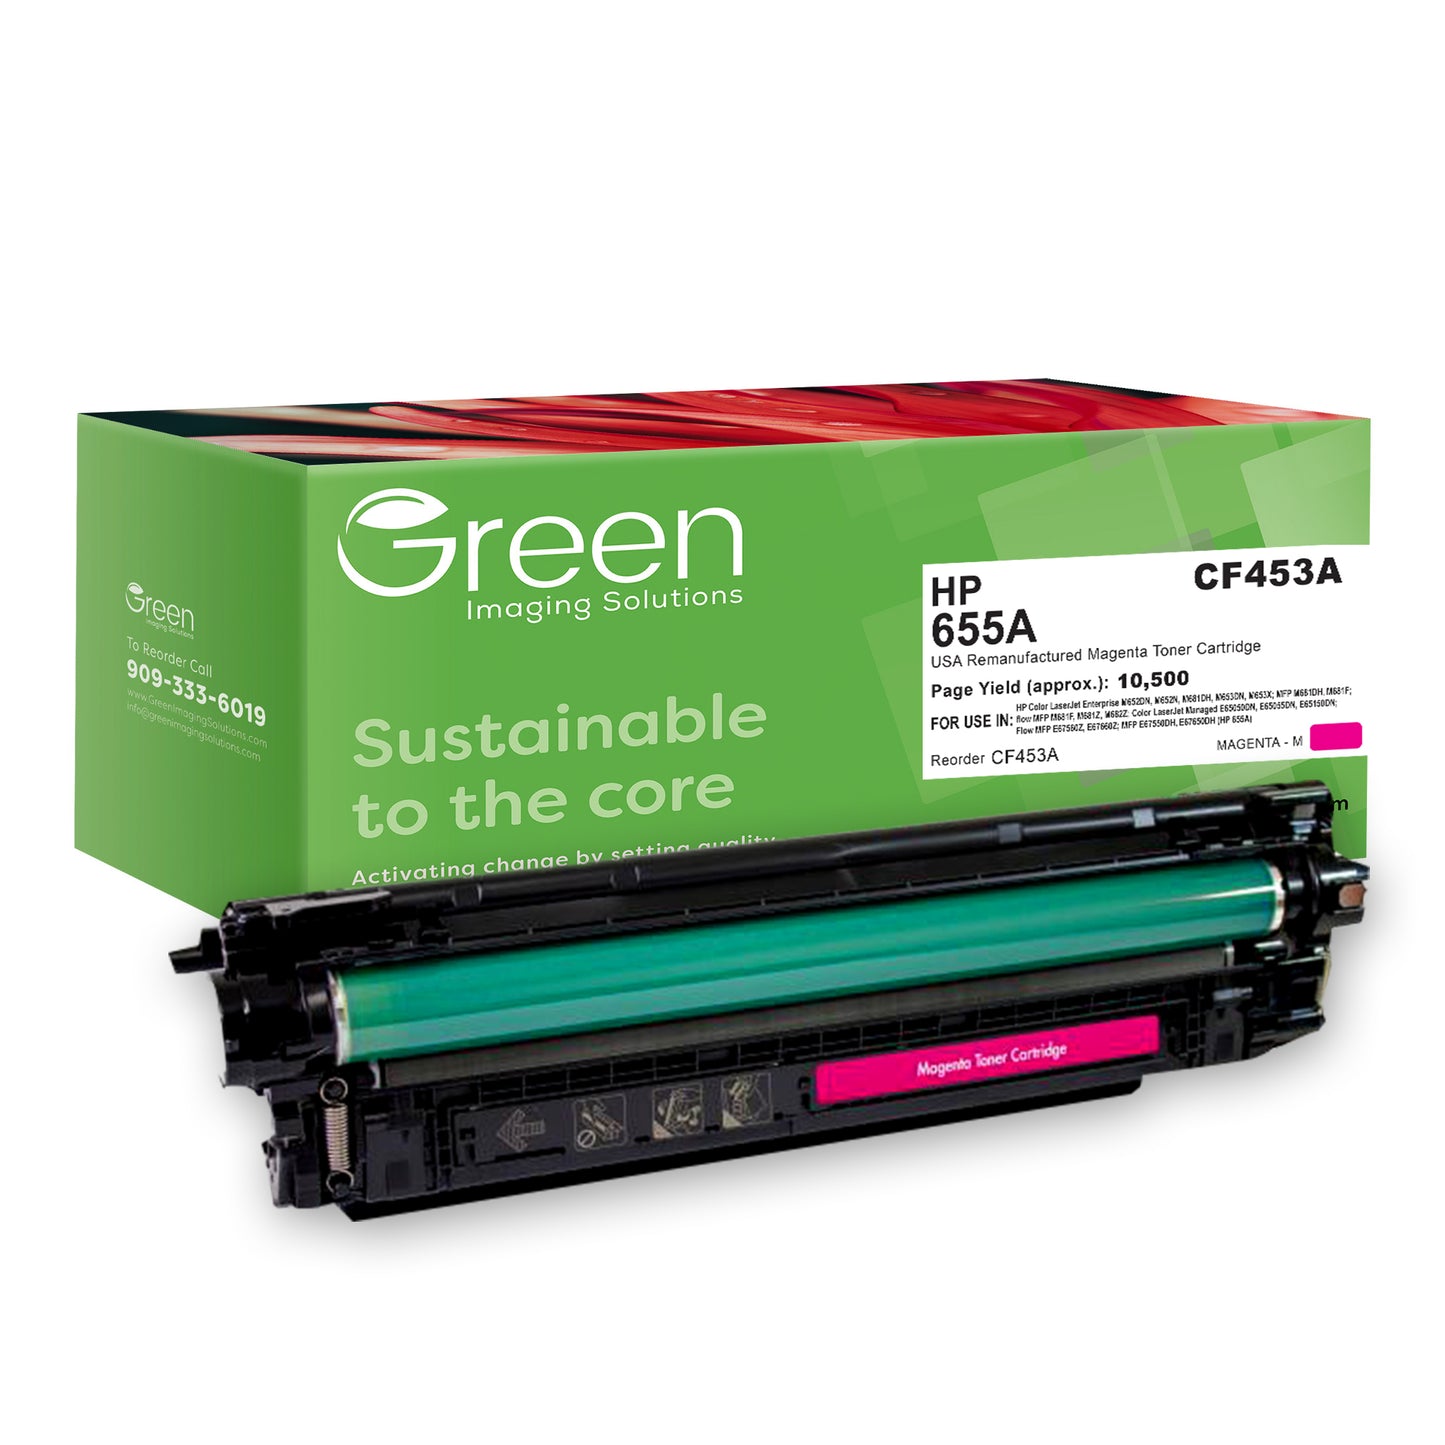 GIS USA Remanufactured Magenta Toner Cartridge for HP CF453A (HP 655A)